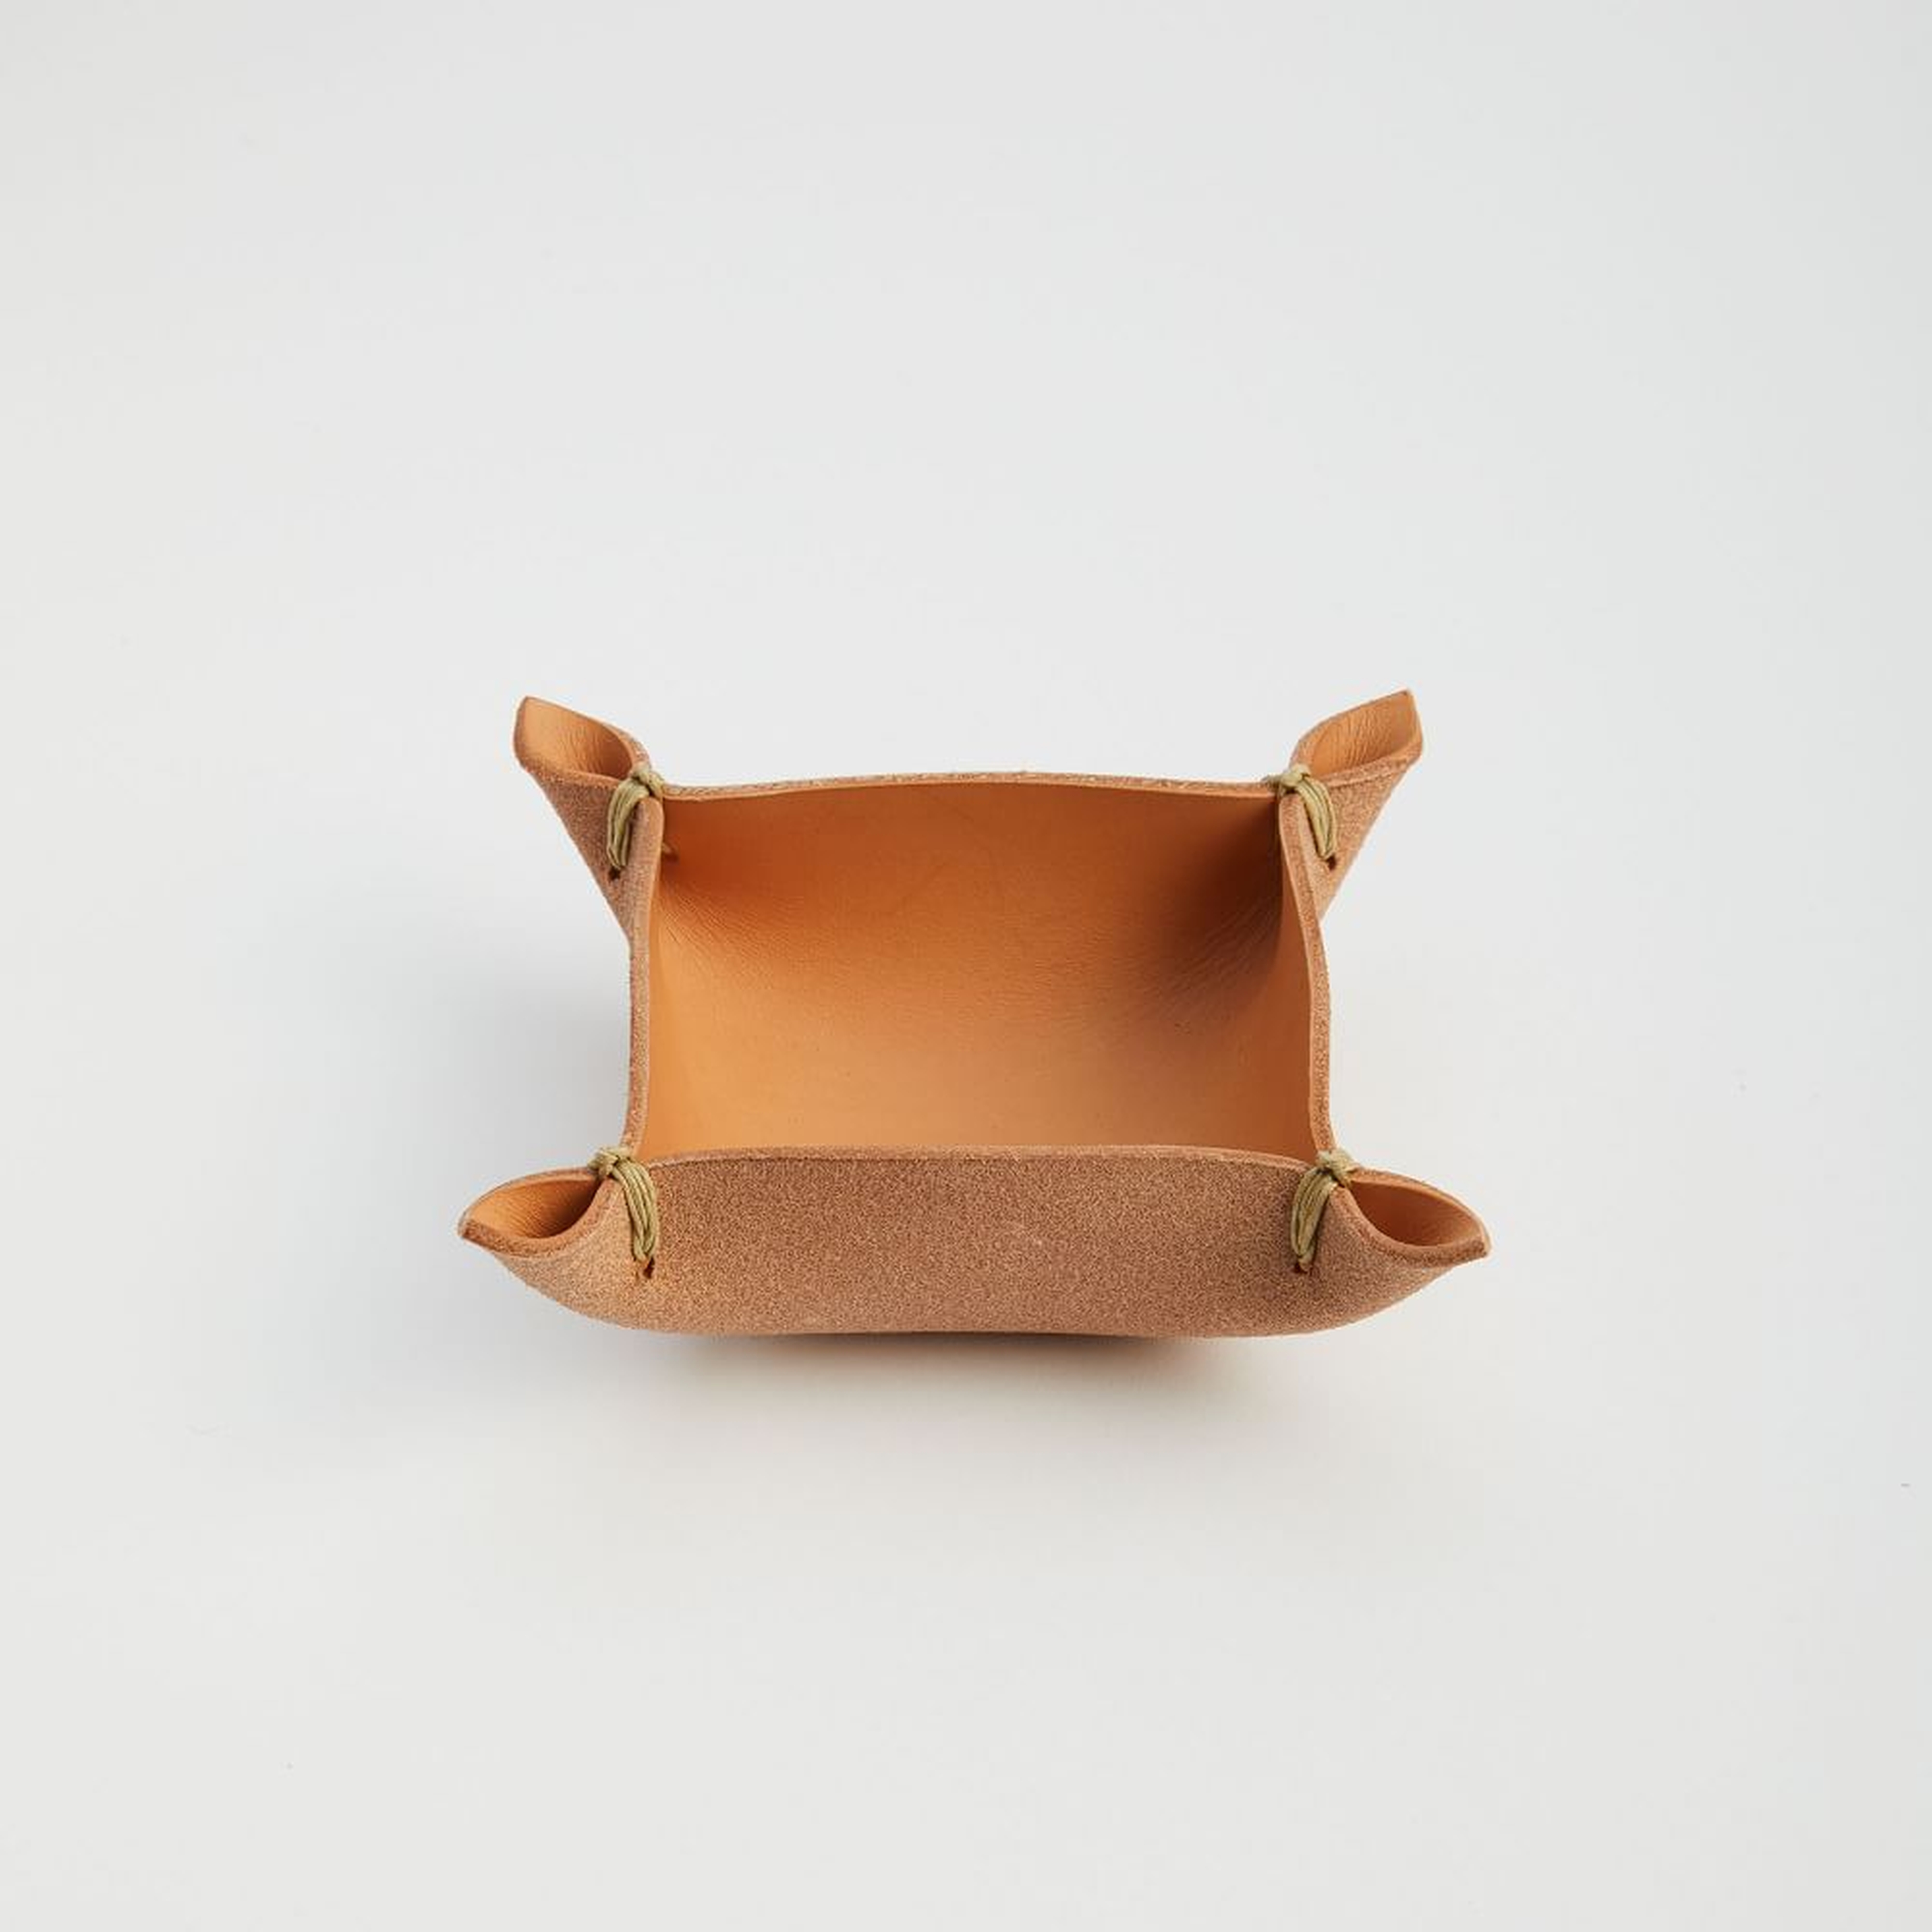 Made Solid Four Corners Leather Box, 6"x6" - West Elm